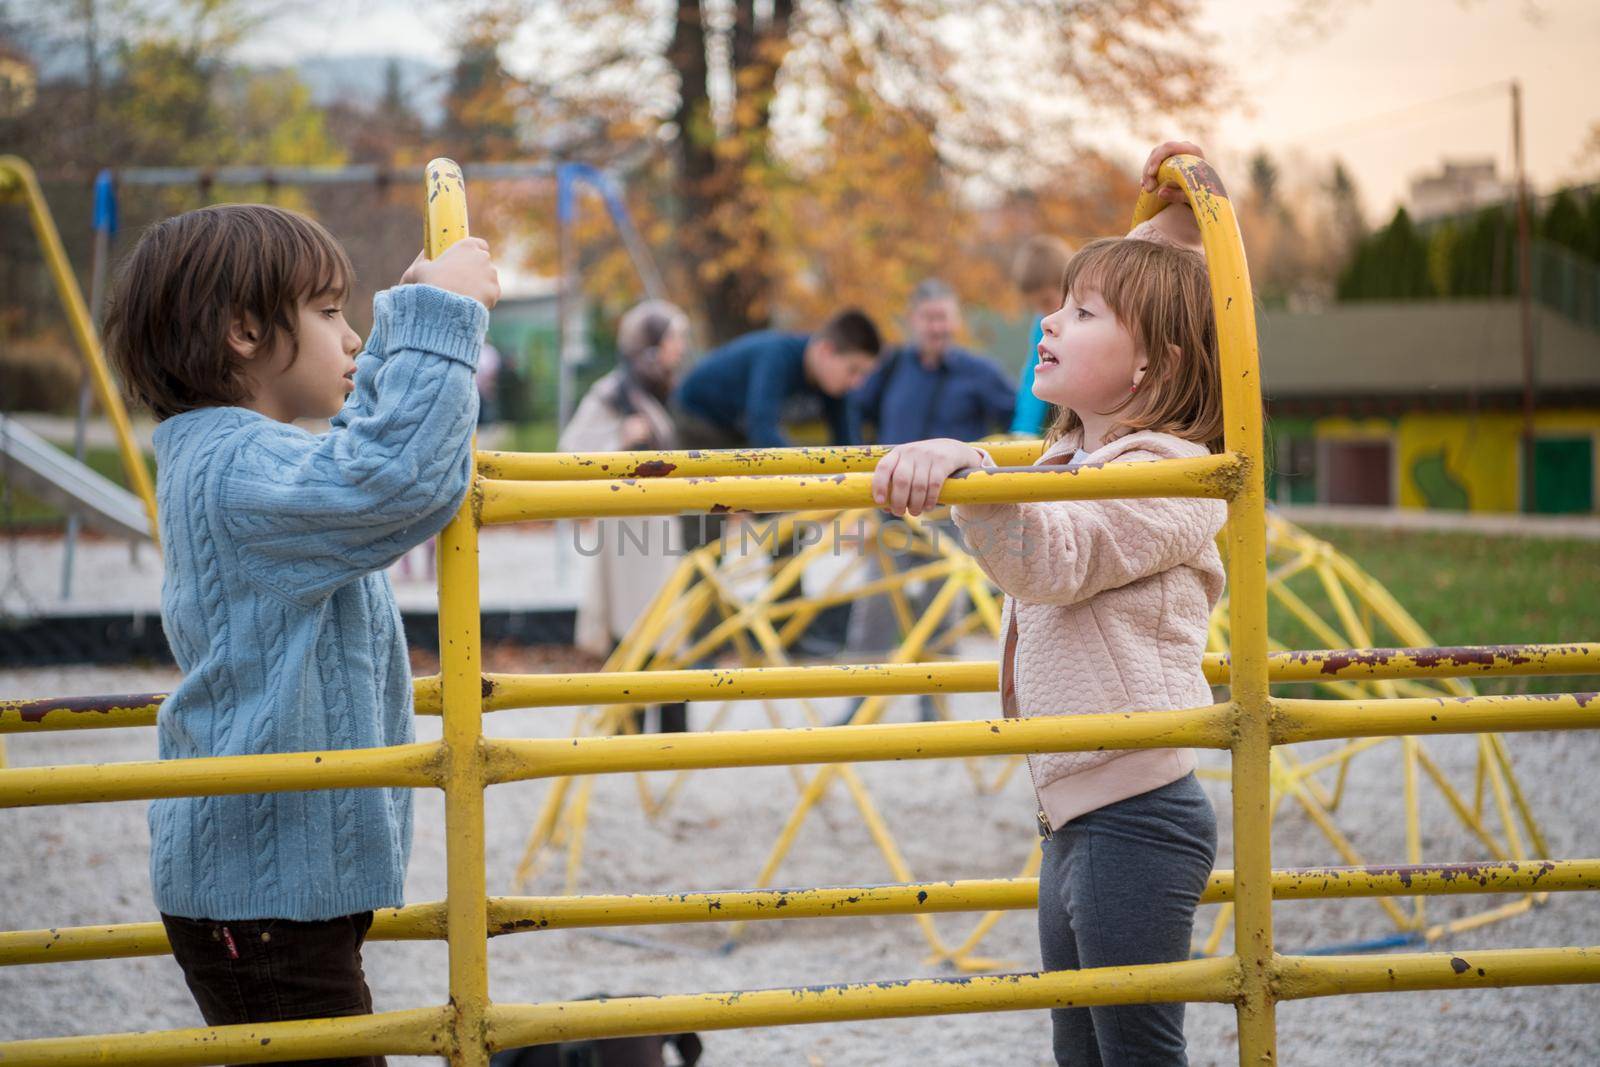 cutte little girl and boy in childrens park having fun and joy while playing in playground on autumn cloudy day